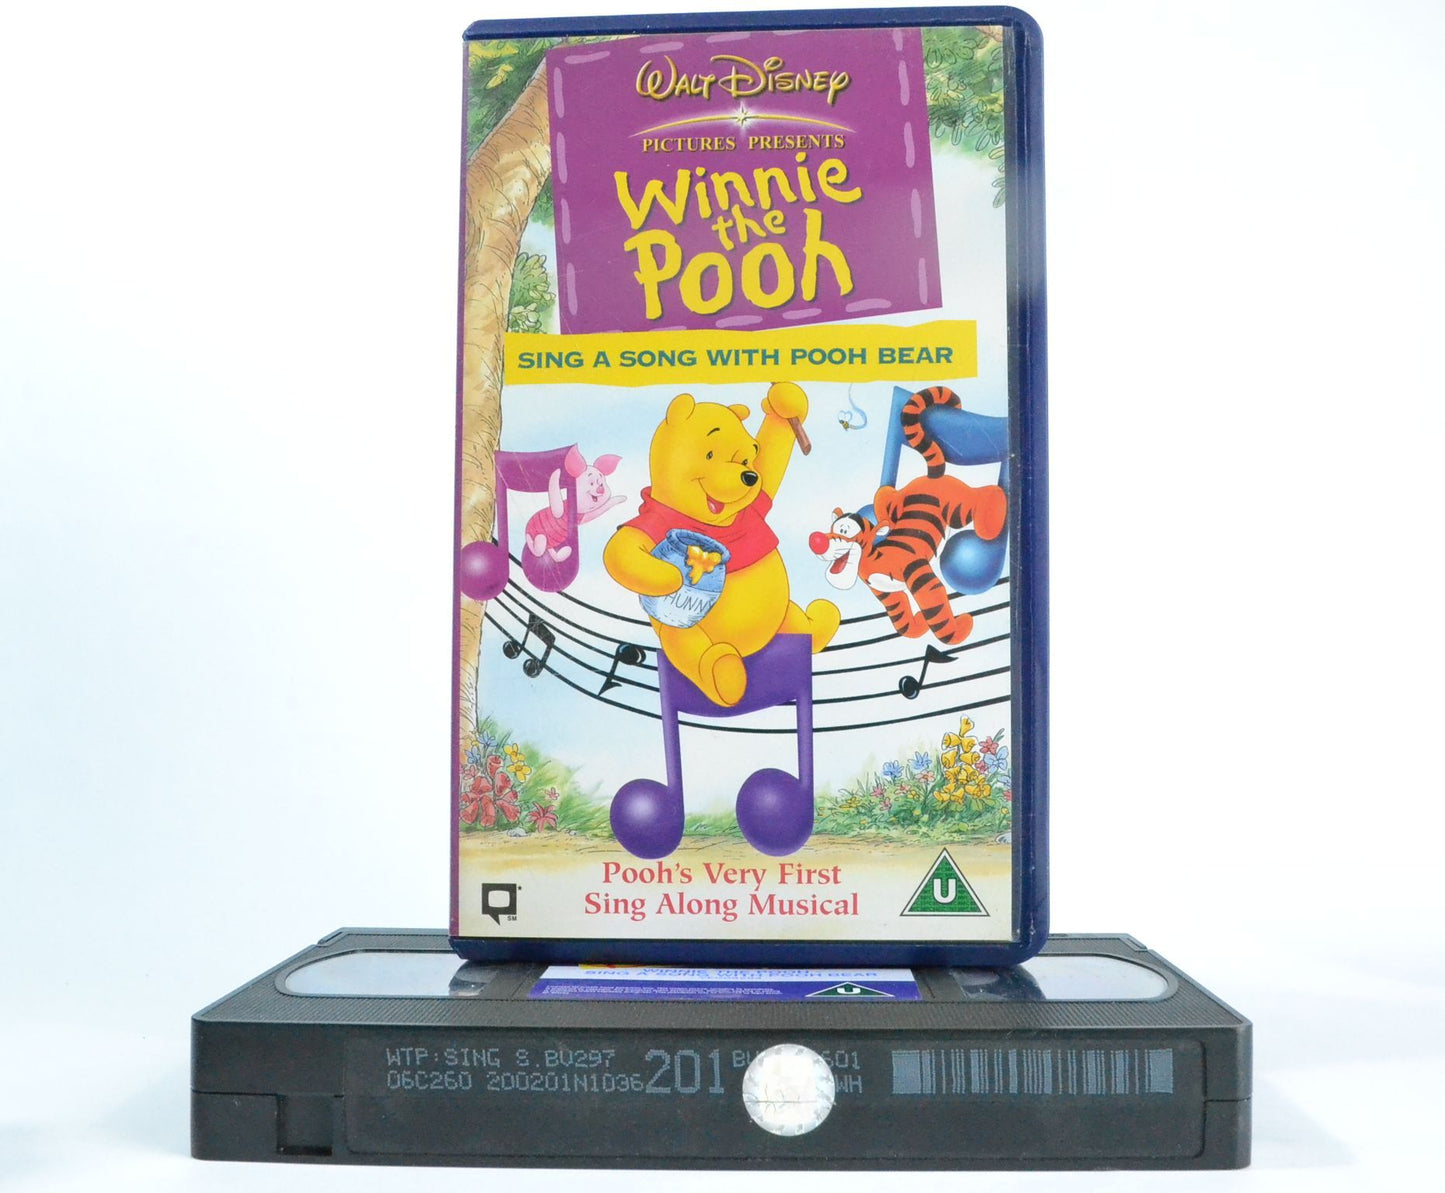 Winnie The Pooh: Sing A Song With Pooh Bear - Disney Education Animation - VHS-